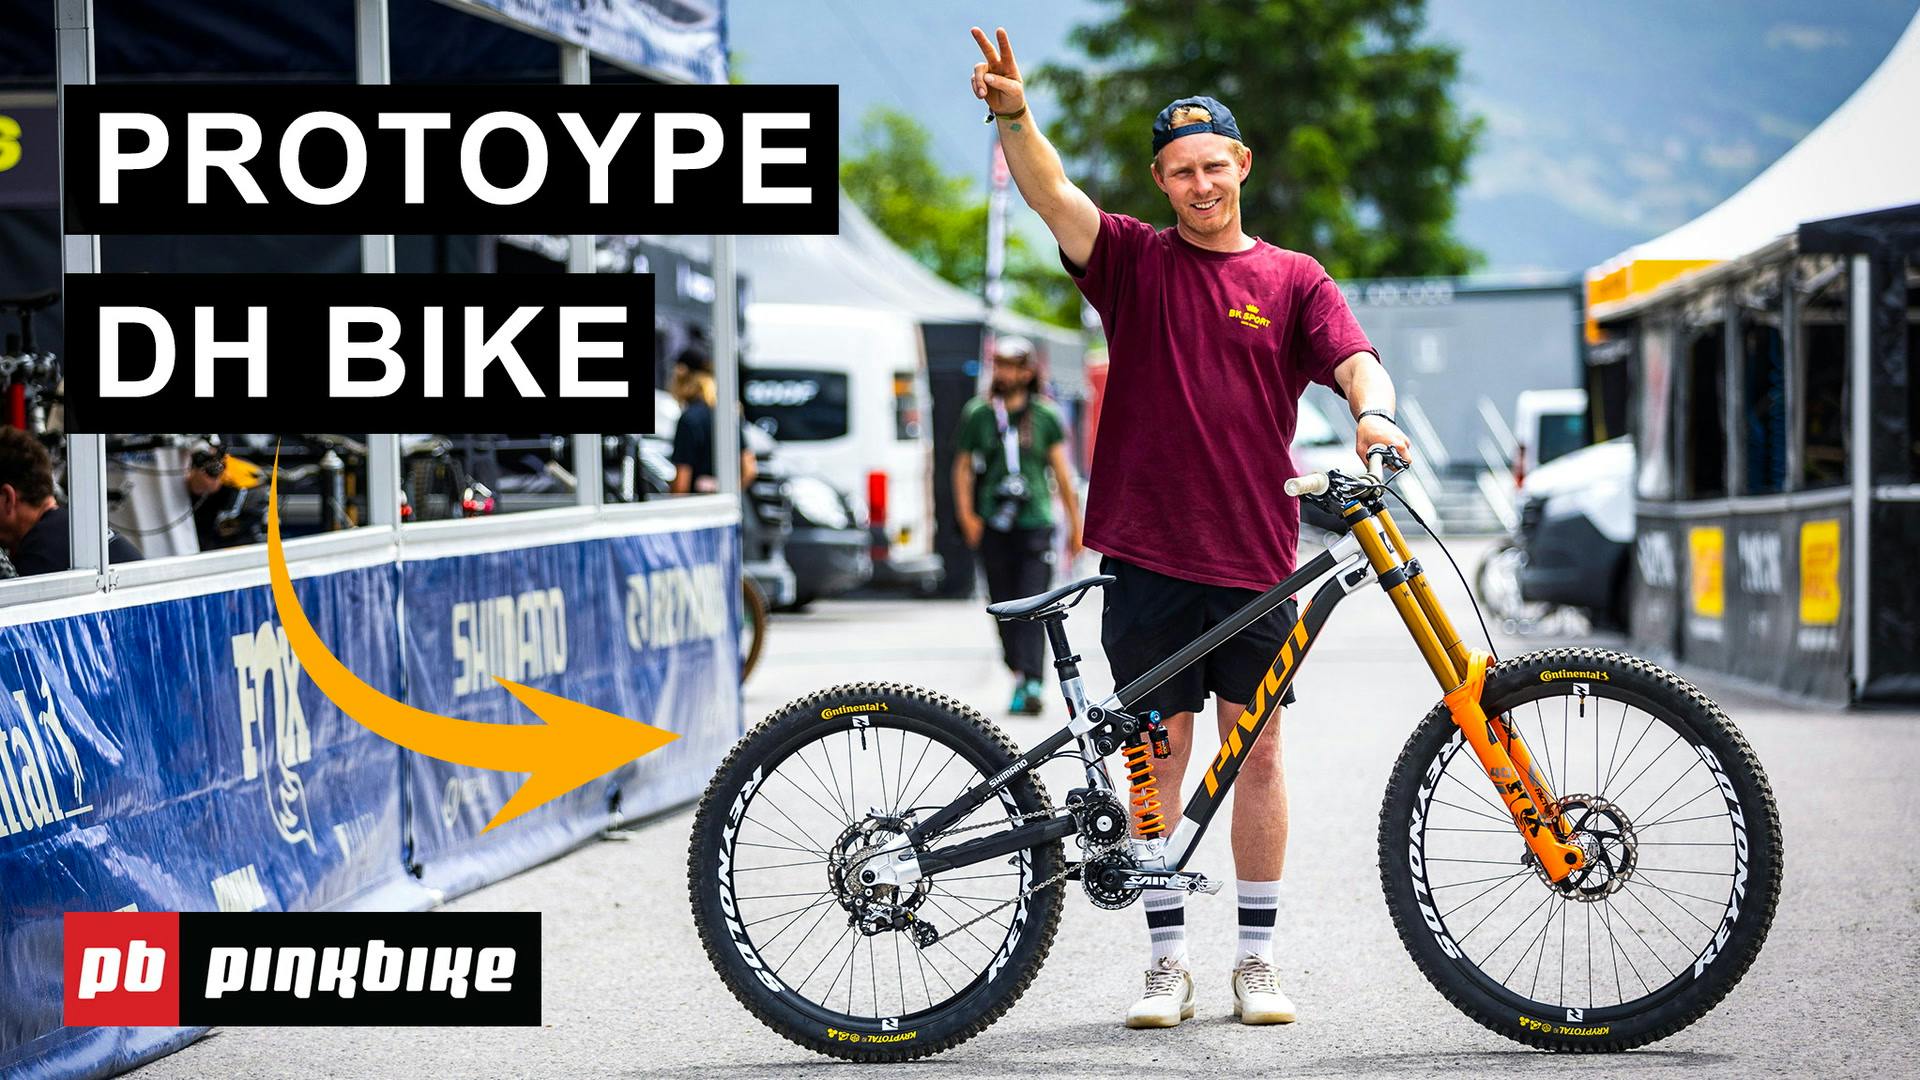 5 High-Performance DH Bikes: 3 Prototypes and 2 Custom Frames